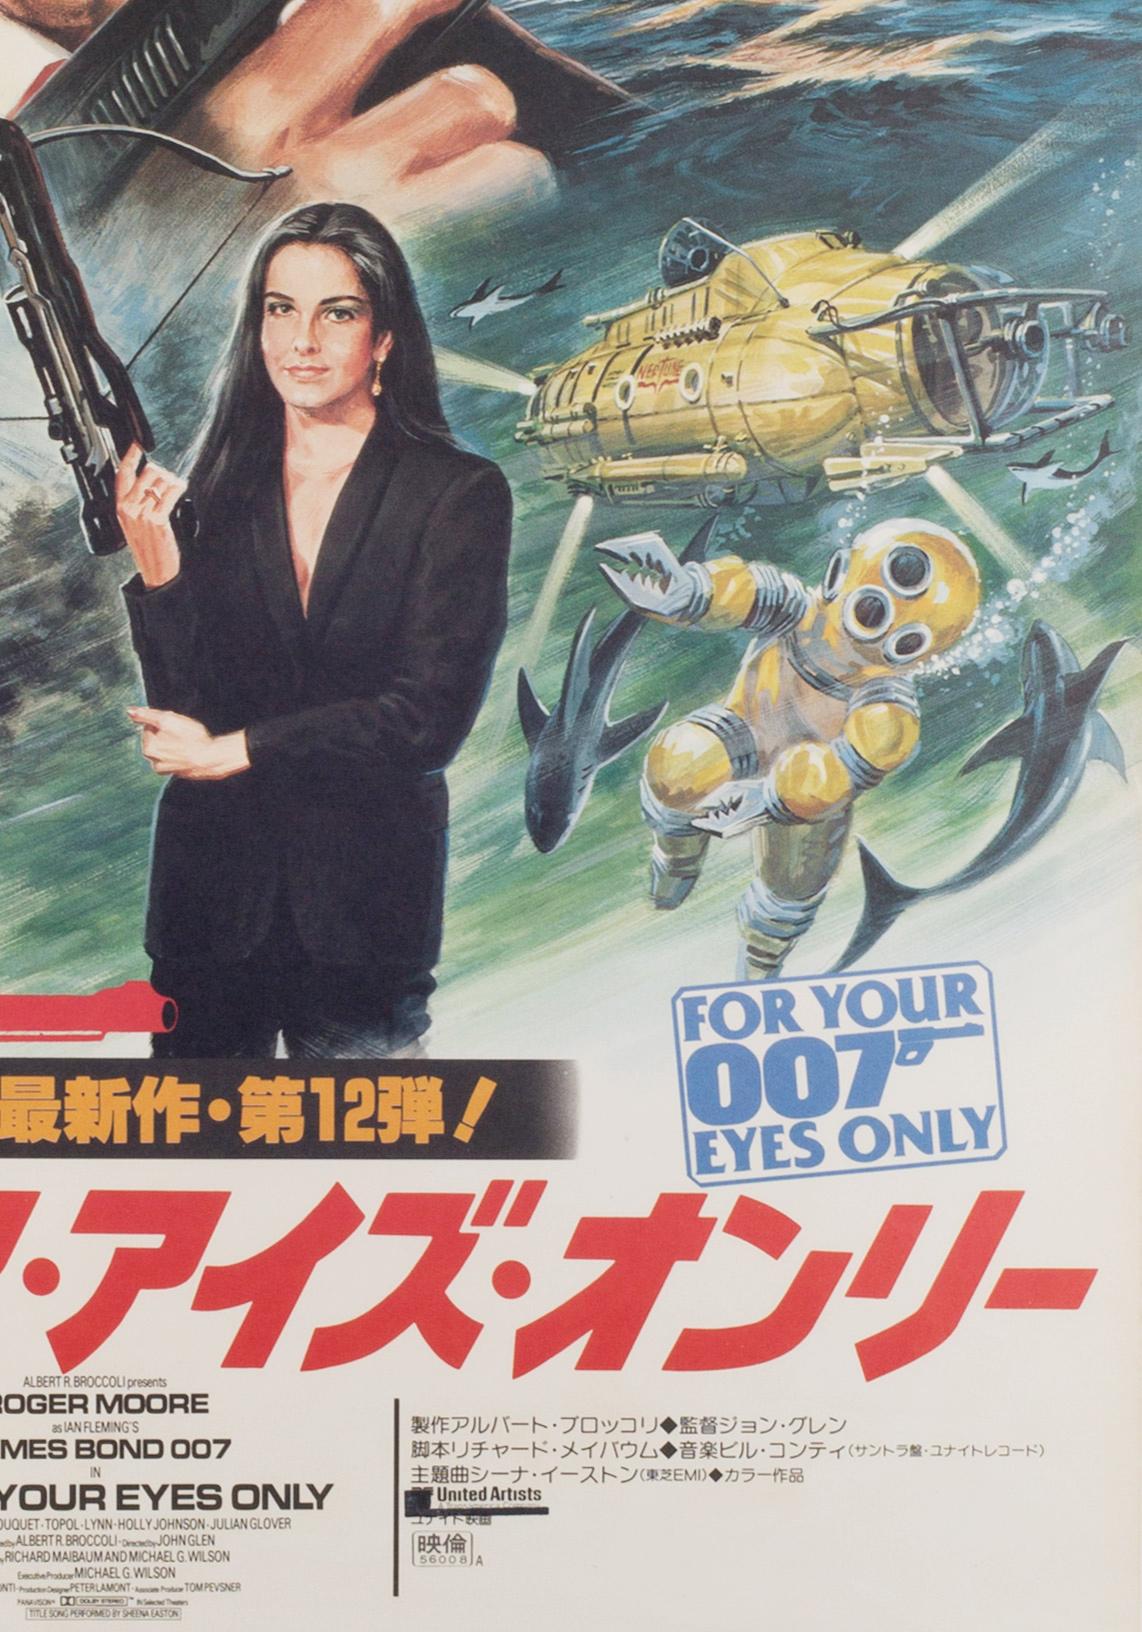 The original vintage Japanese poster for Bond film For Your Eyes Only. Great montage imagery by Noguchi.

Actual poster size 20 1/4 x 28 1/2 inches. Excellent/ near mint condition. Sent rolled.

